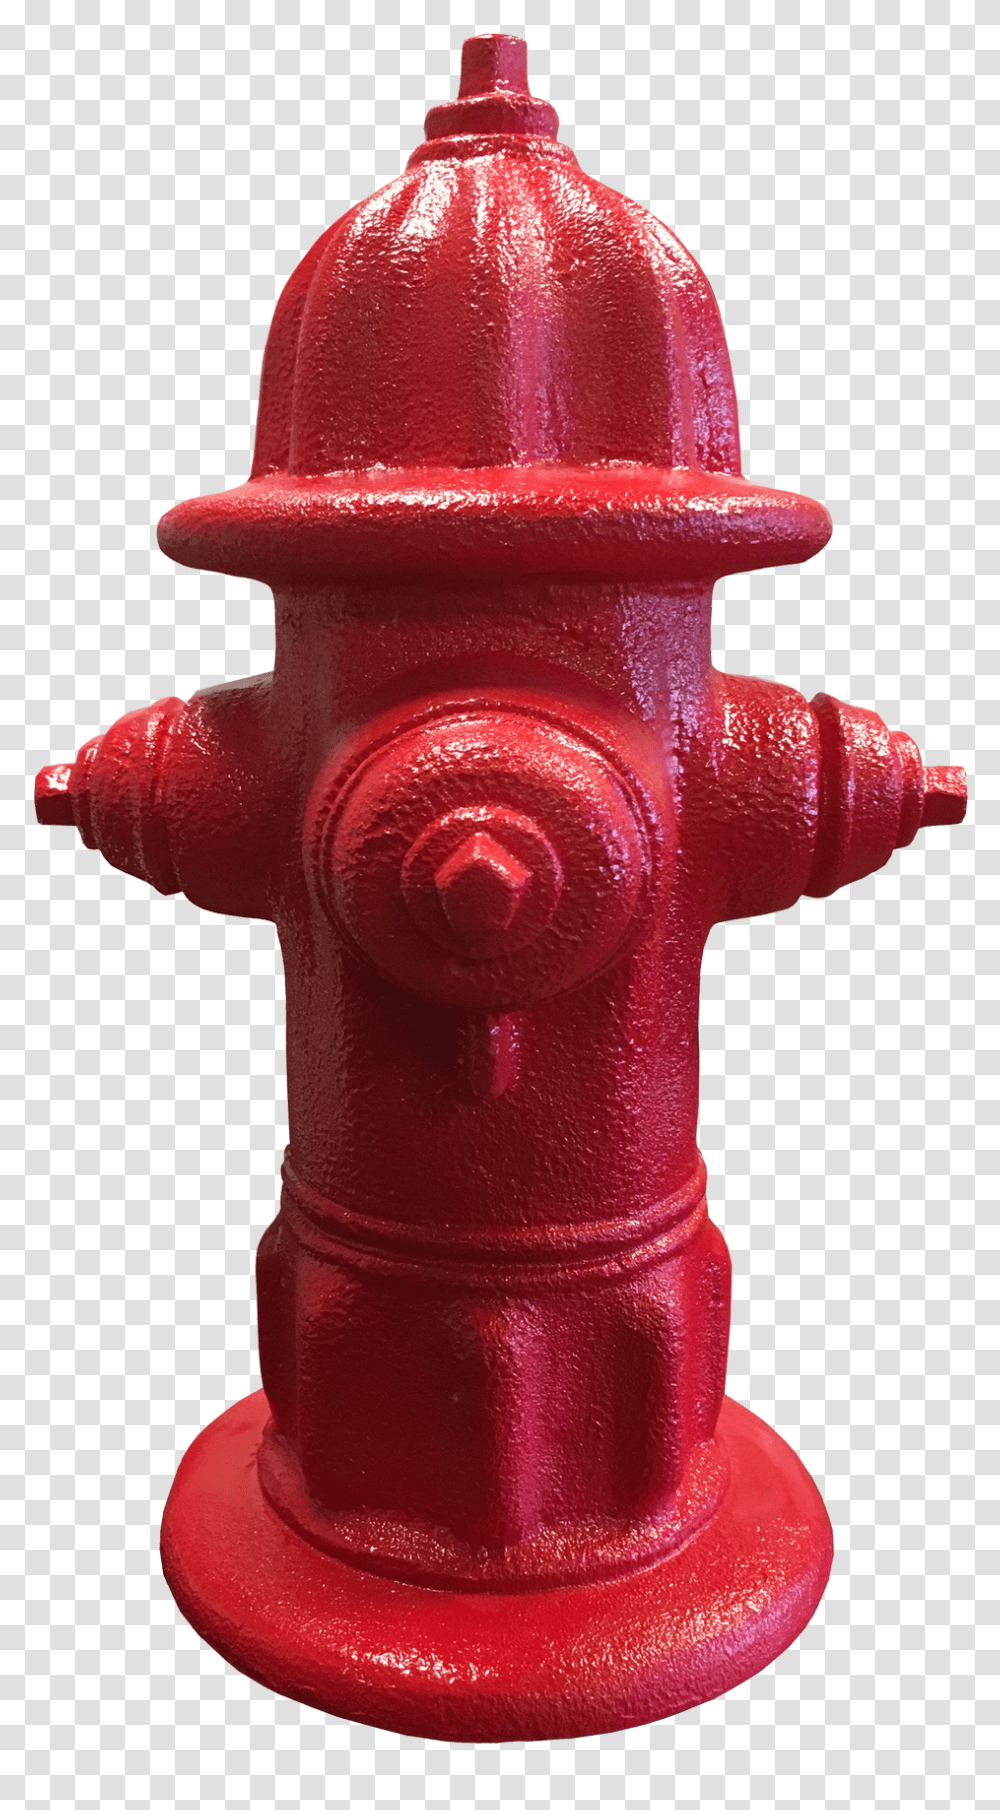 Fire Hydrant Image Transparent Png